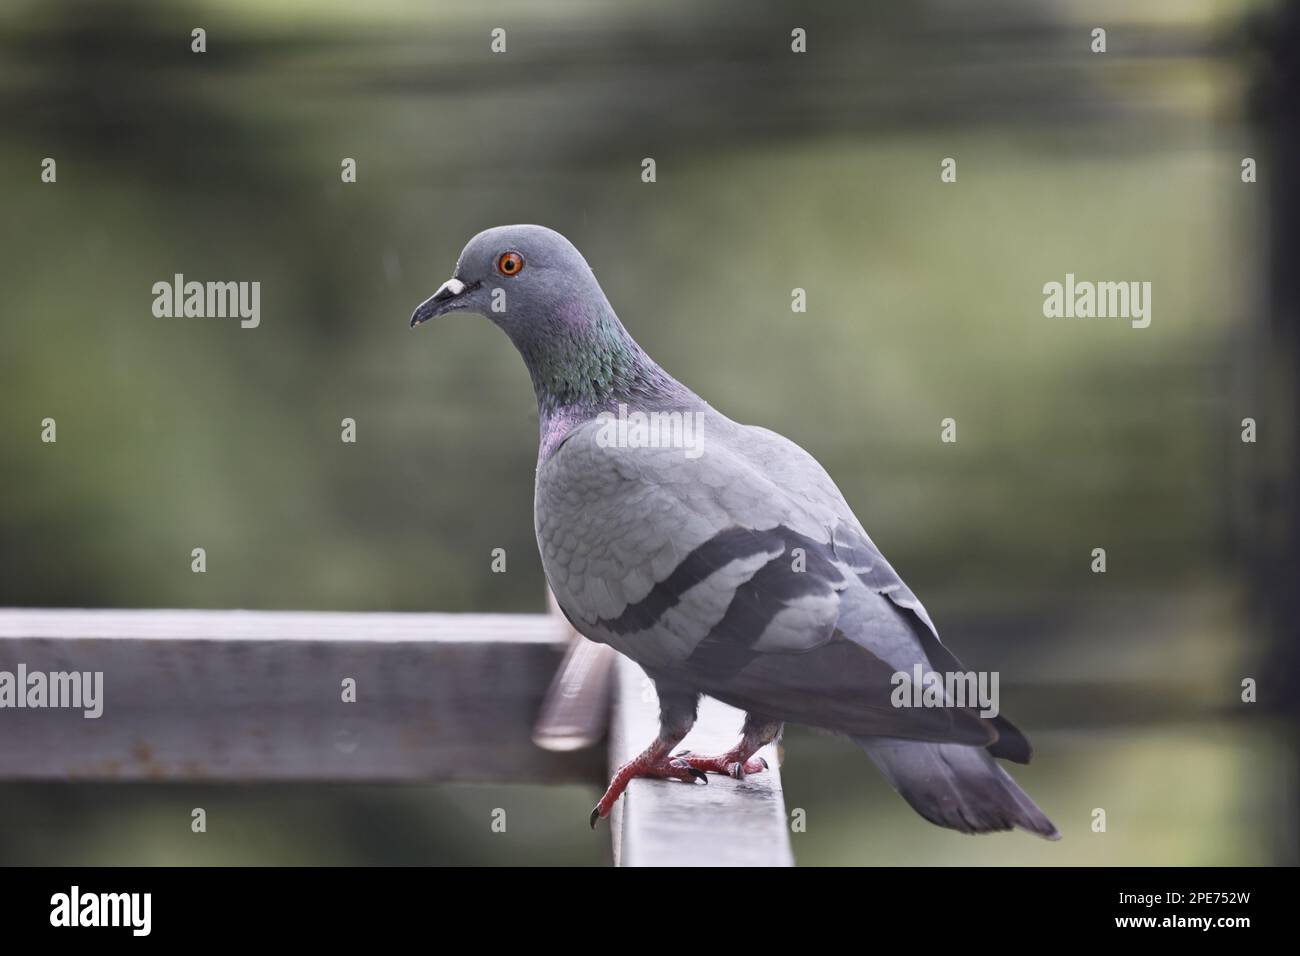 Pigeon standing in gallery of an house terrace Stock Photo